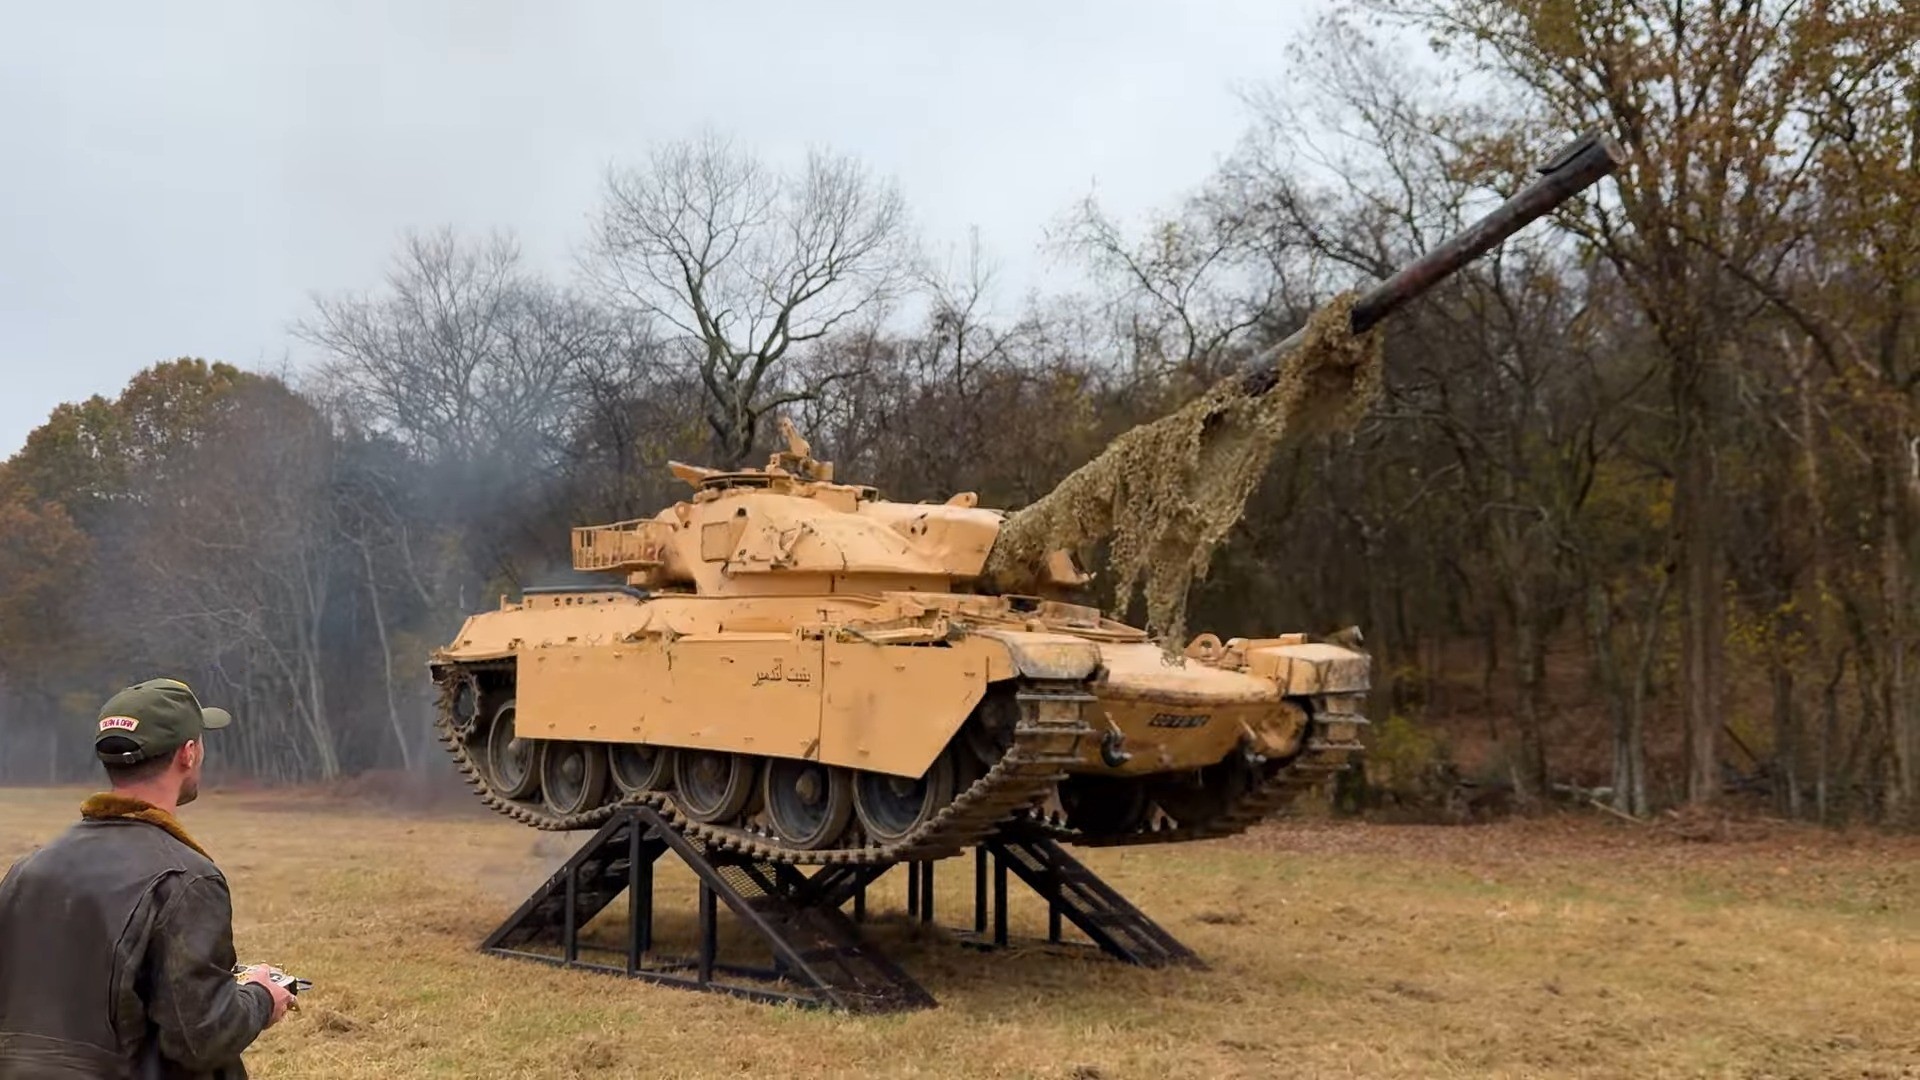 https://s1.cdn.autoevolution.com/images/news/texas-remote-controlled-full-size-battle-tank-smashes-things-for-social-media-adulation-225375_1.jpg